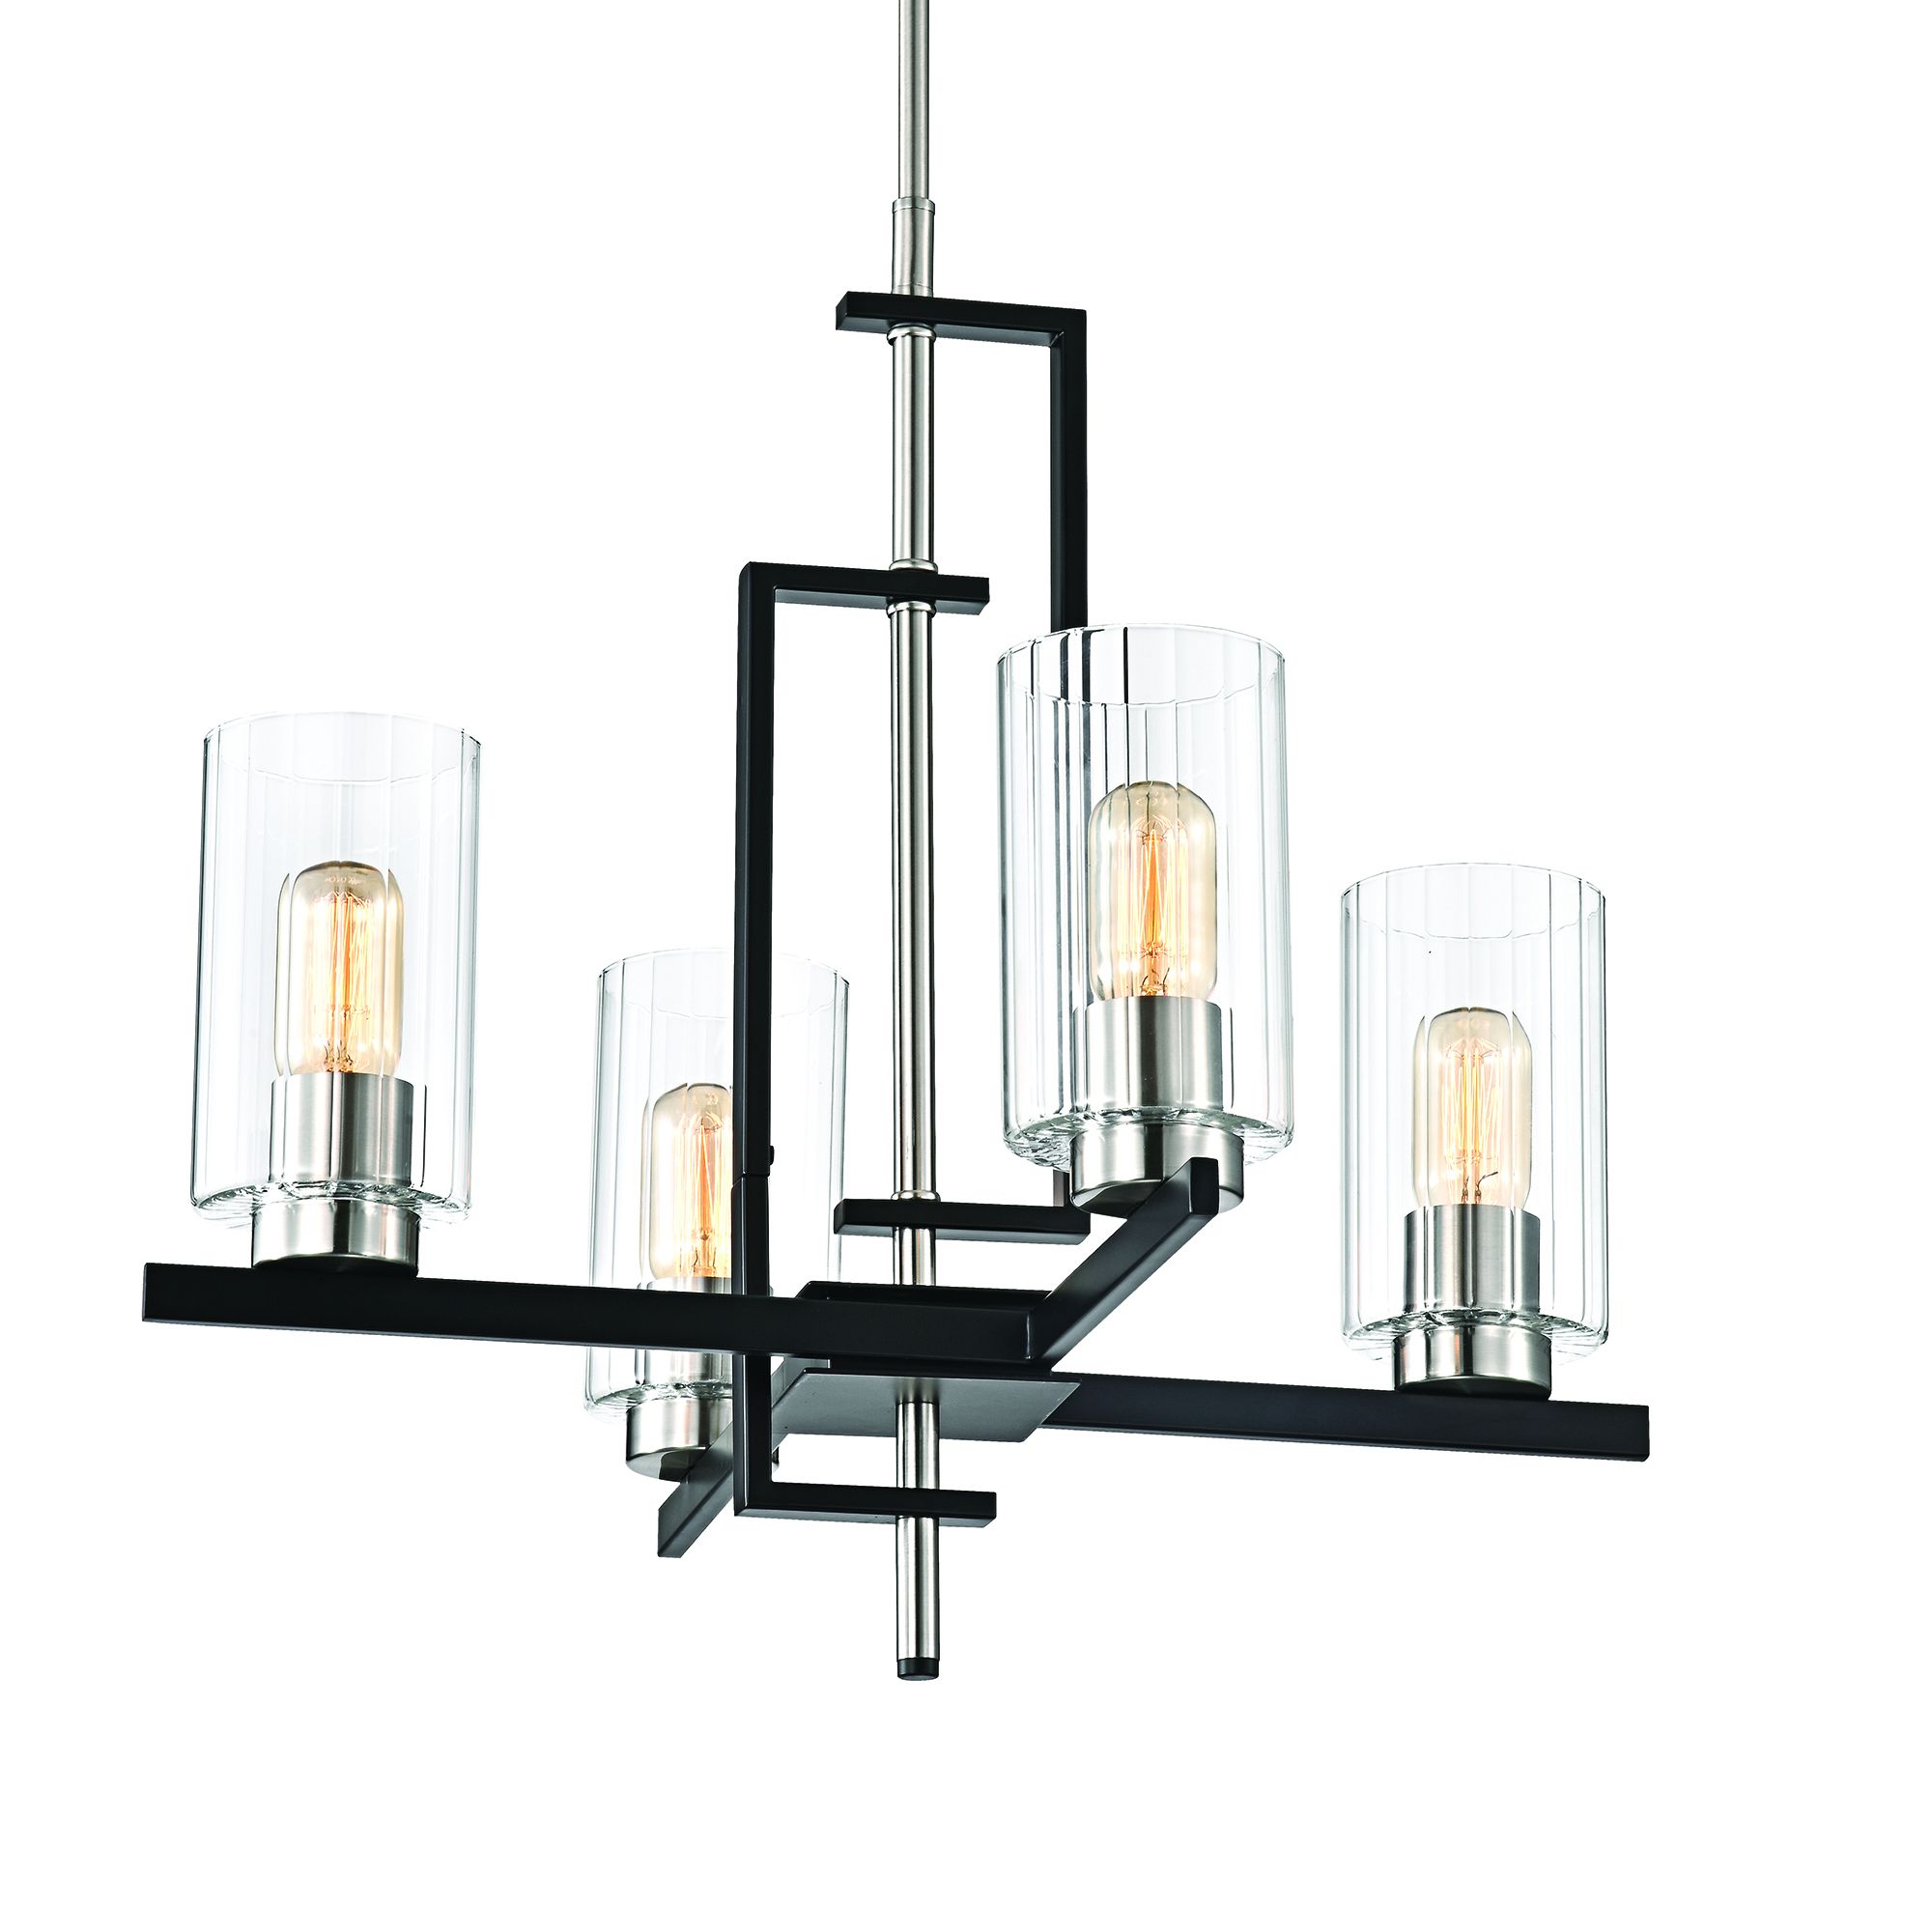 4 Light Black And Brushed Nickel Pendant Chandelier Clear Within Brushed Nickel Metal And Wood Modern Chandeliers (View 15 of 15)